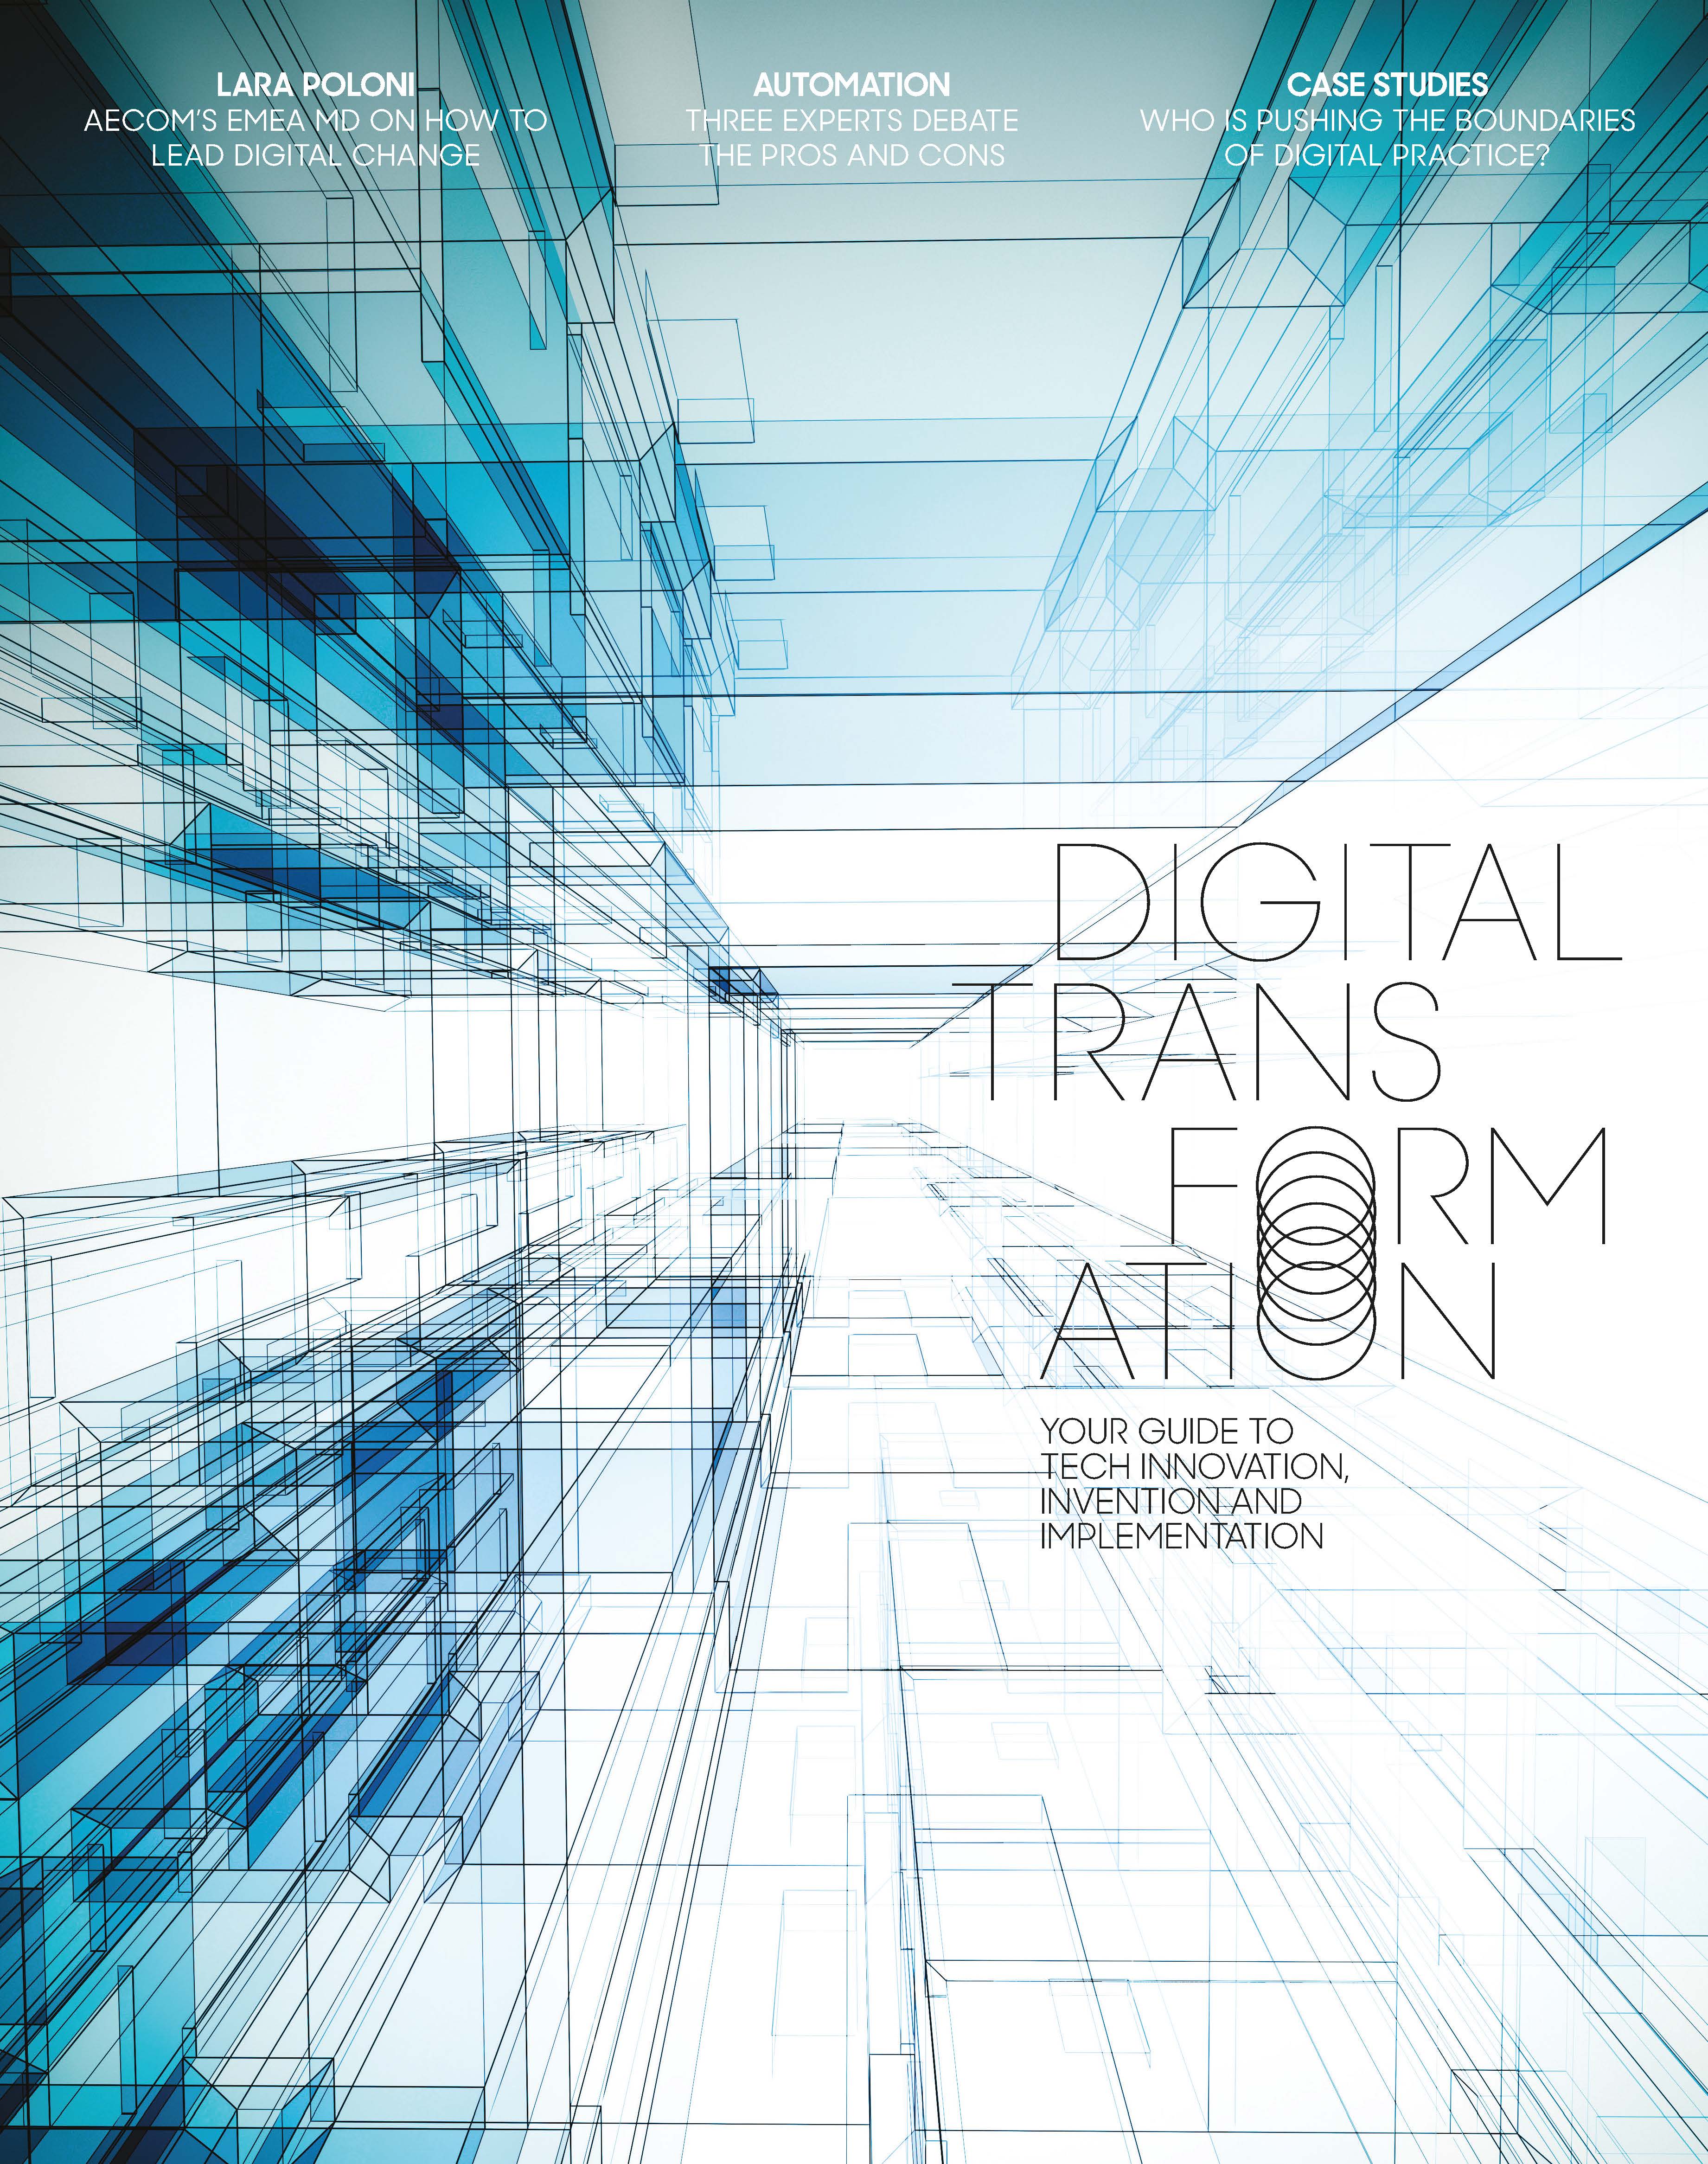 Digital transformation: Your guide to tech innovation, invention and implementation